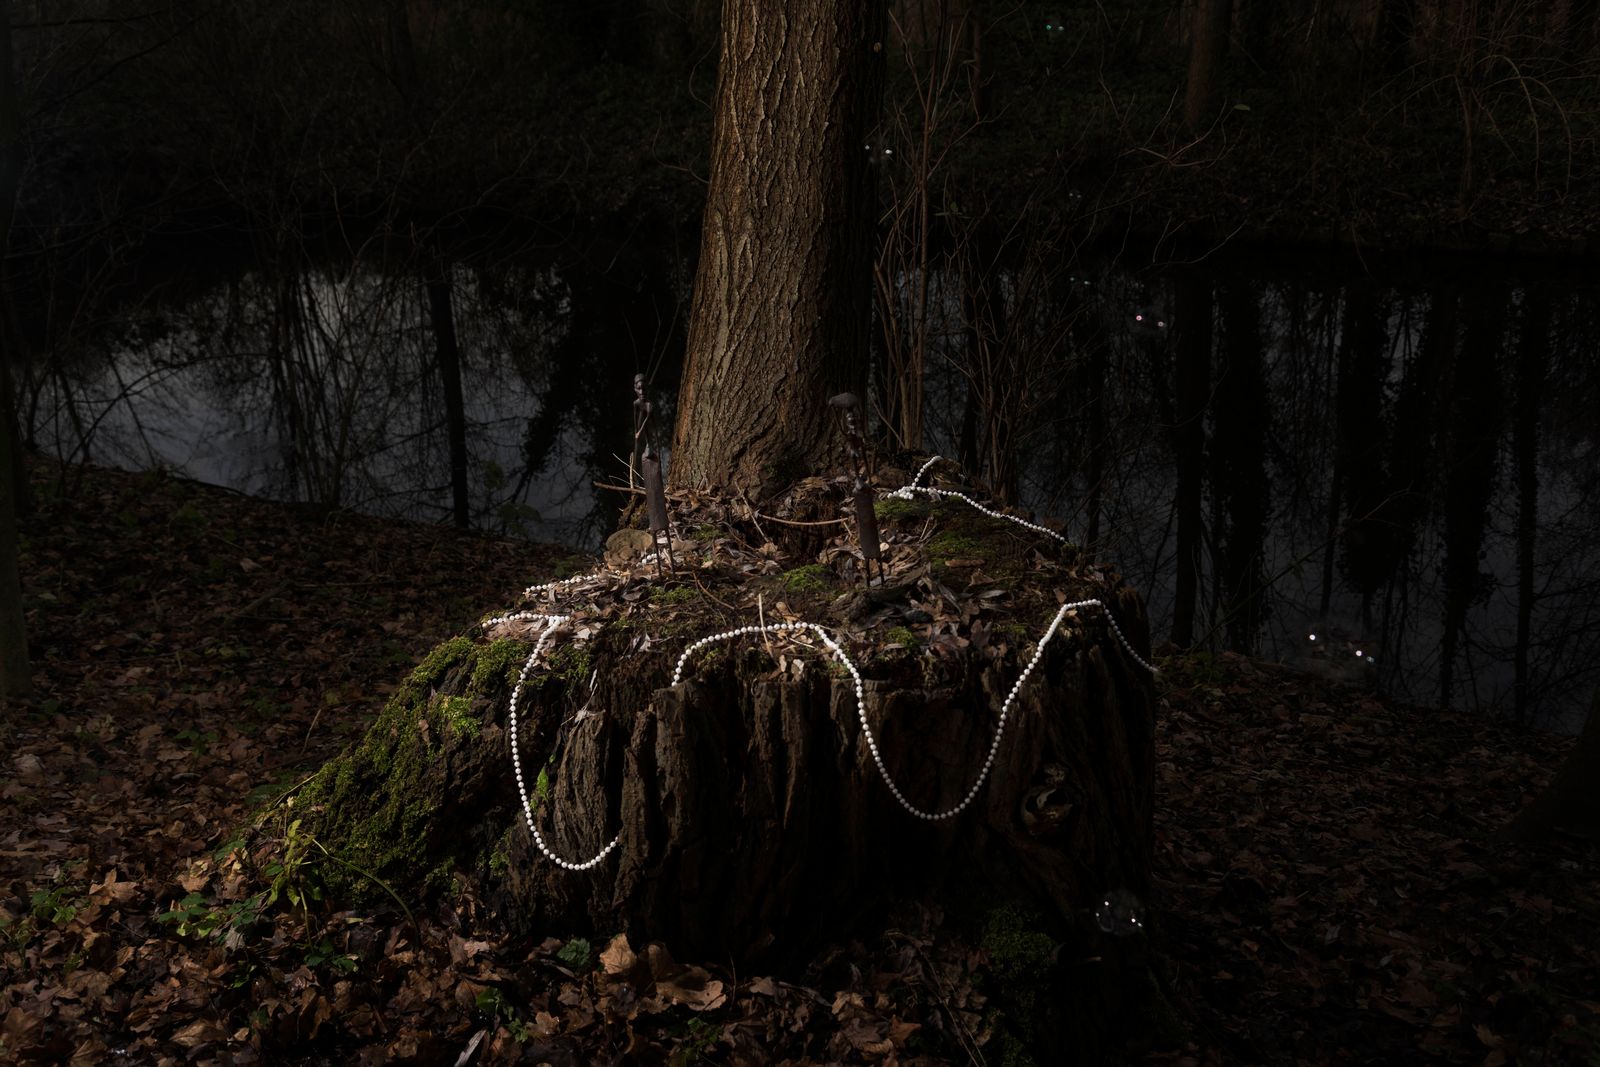 © Michelle Piergoelam - Image from the I heard water holds a secret photography project